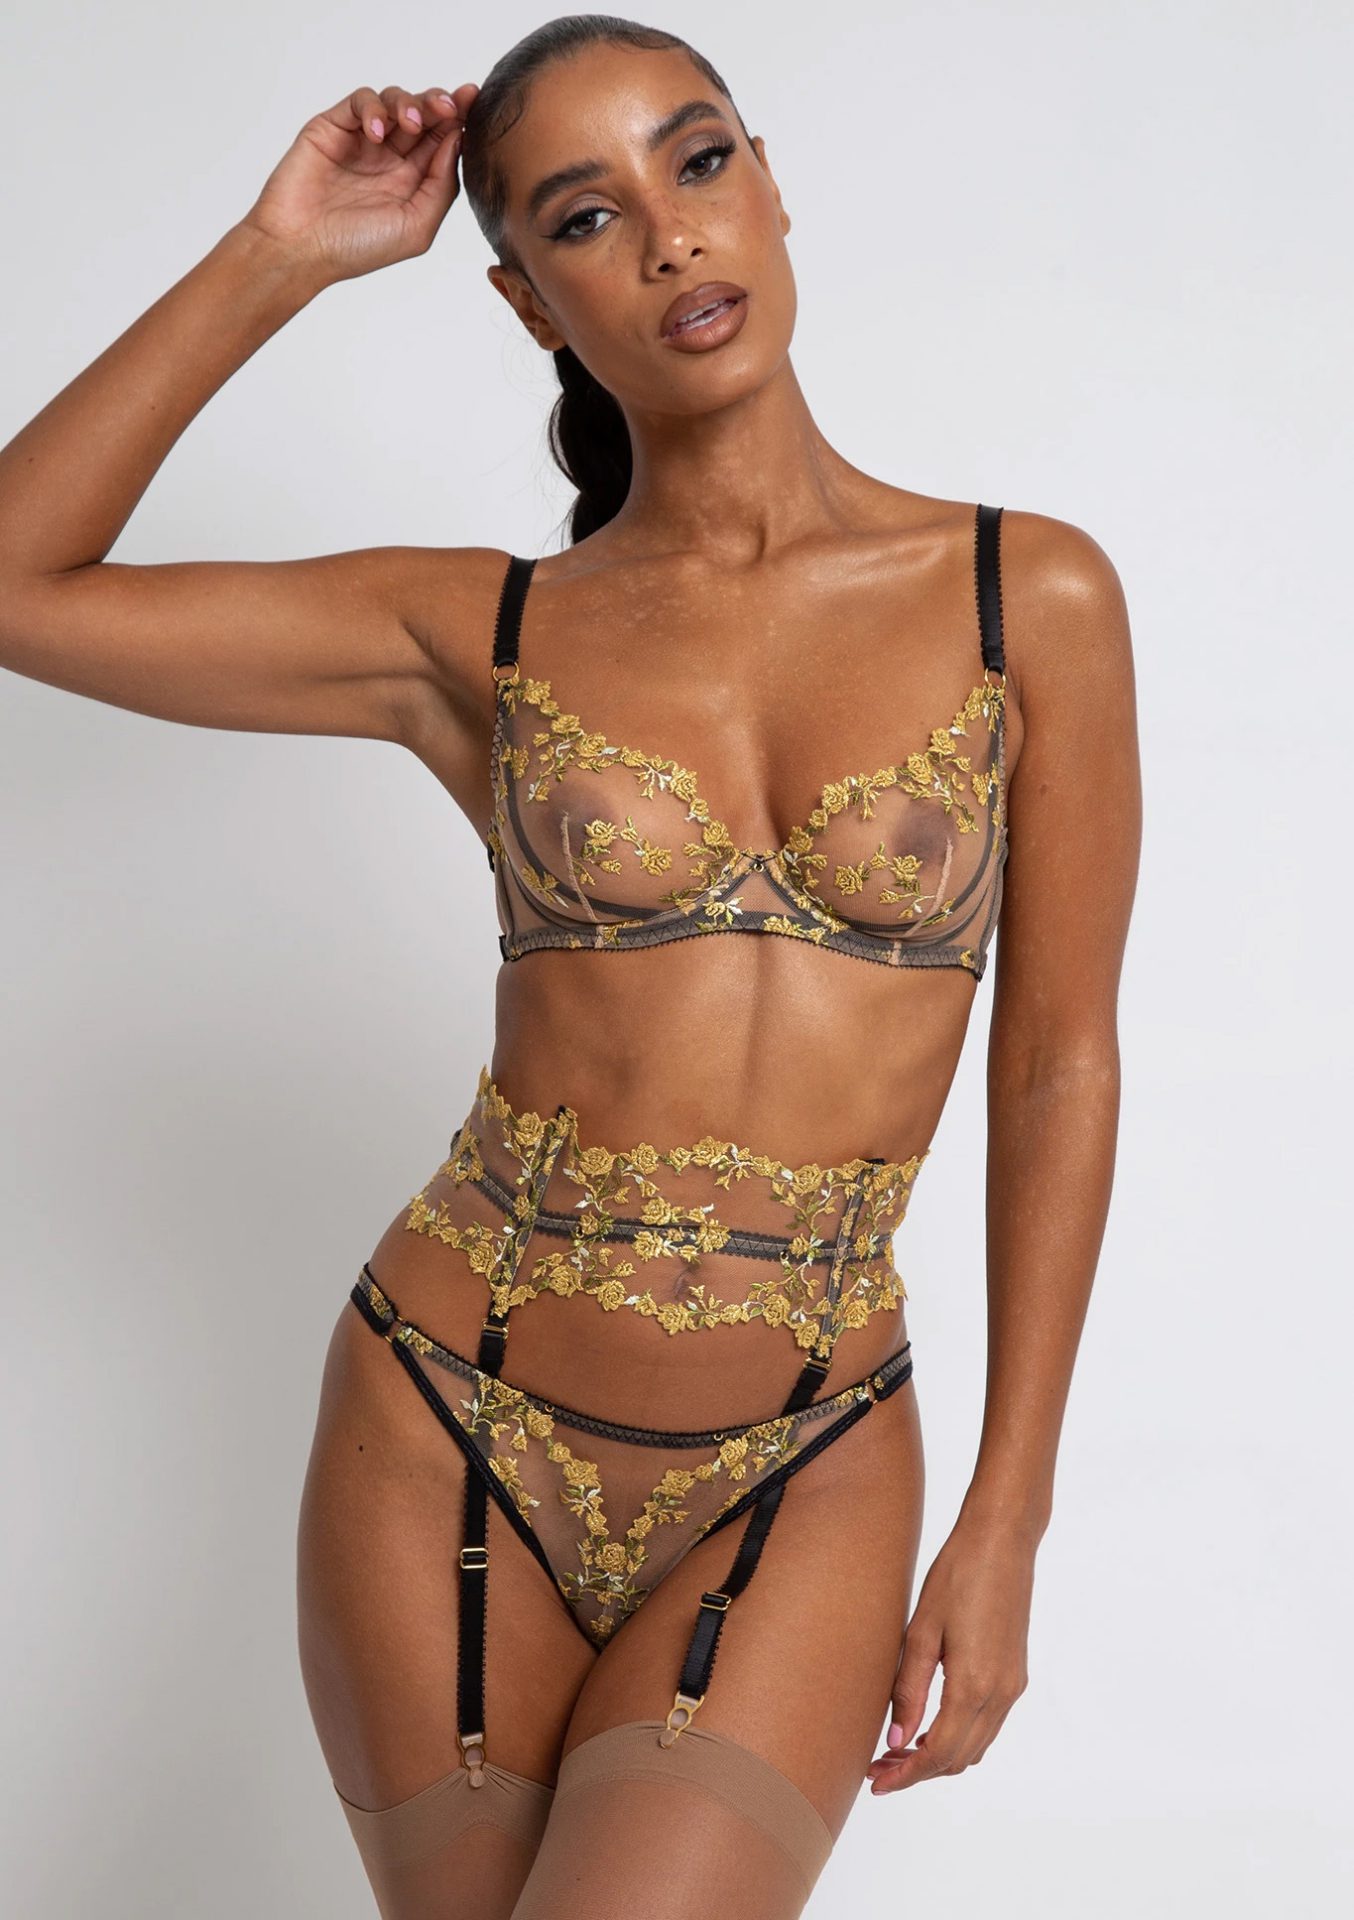 20 Silver & Gold Lingerie Looks Perfect for New Year's Eve